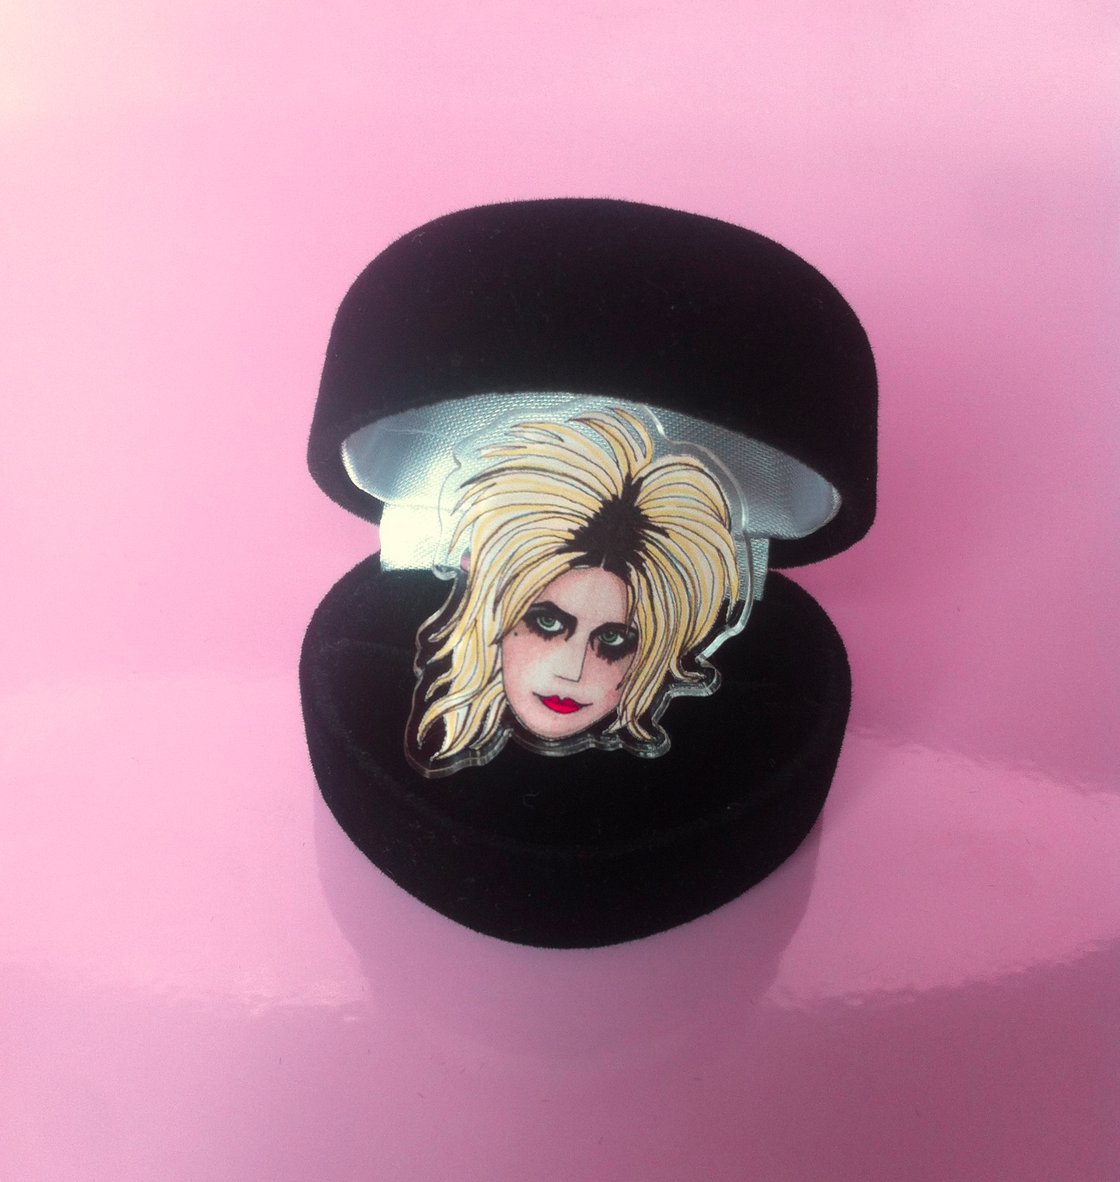 Image of Donita Spark L7 acrylic plastic adjustable ring sold in black heart shaped box. 